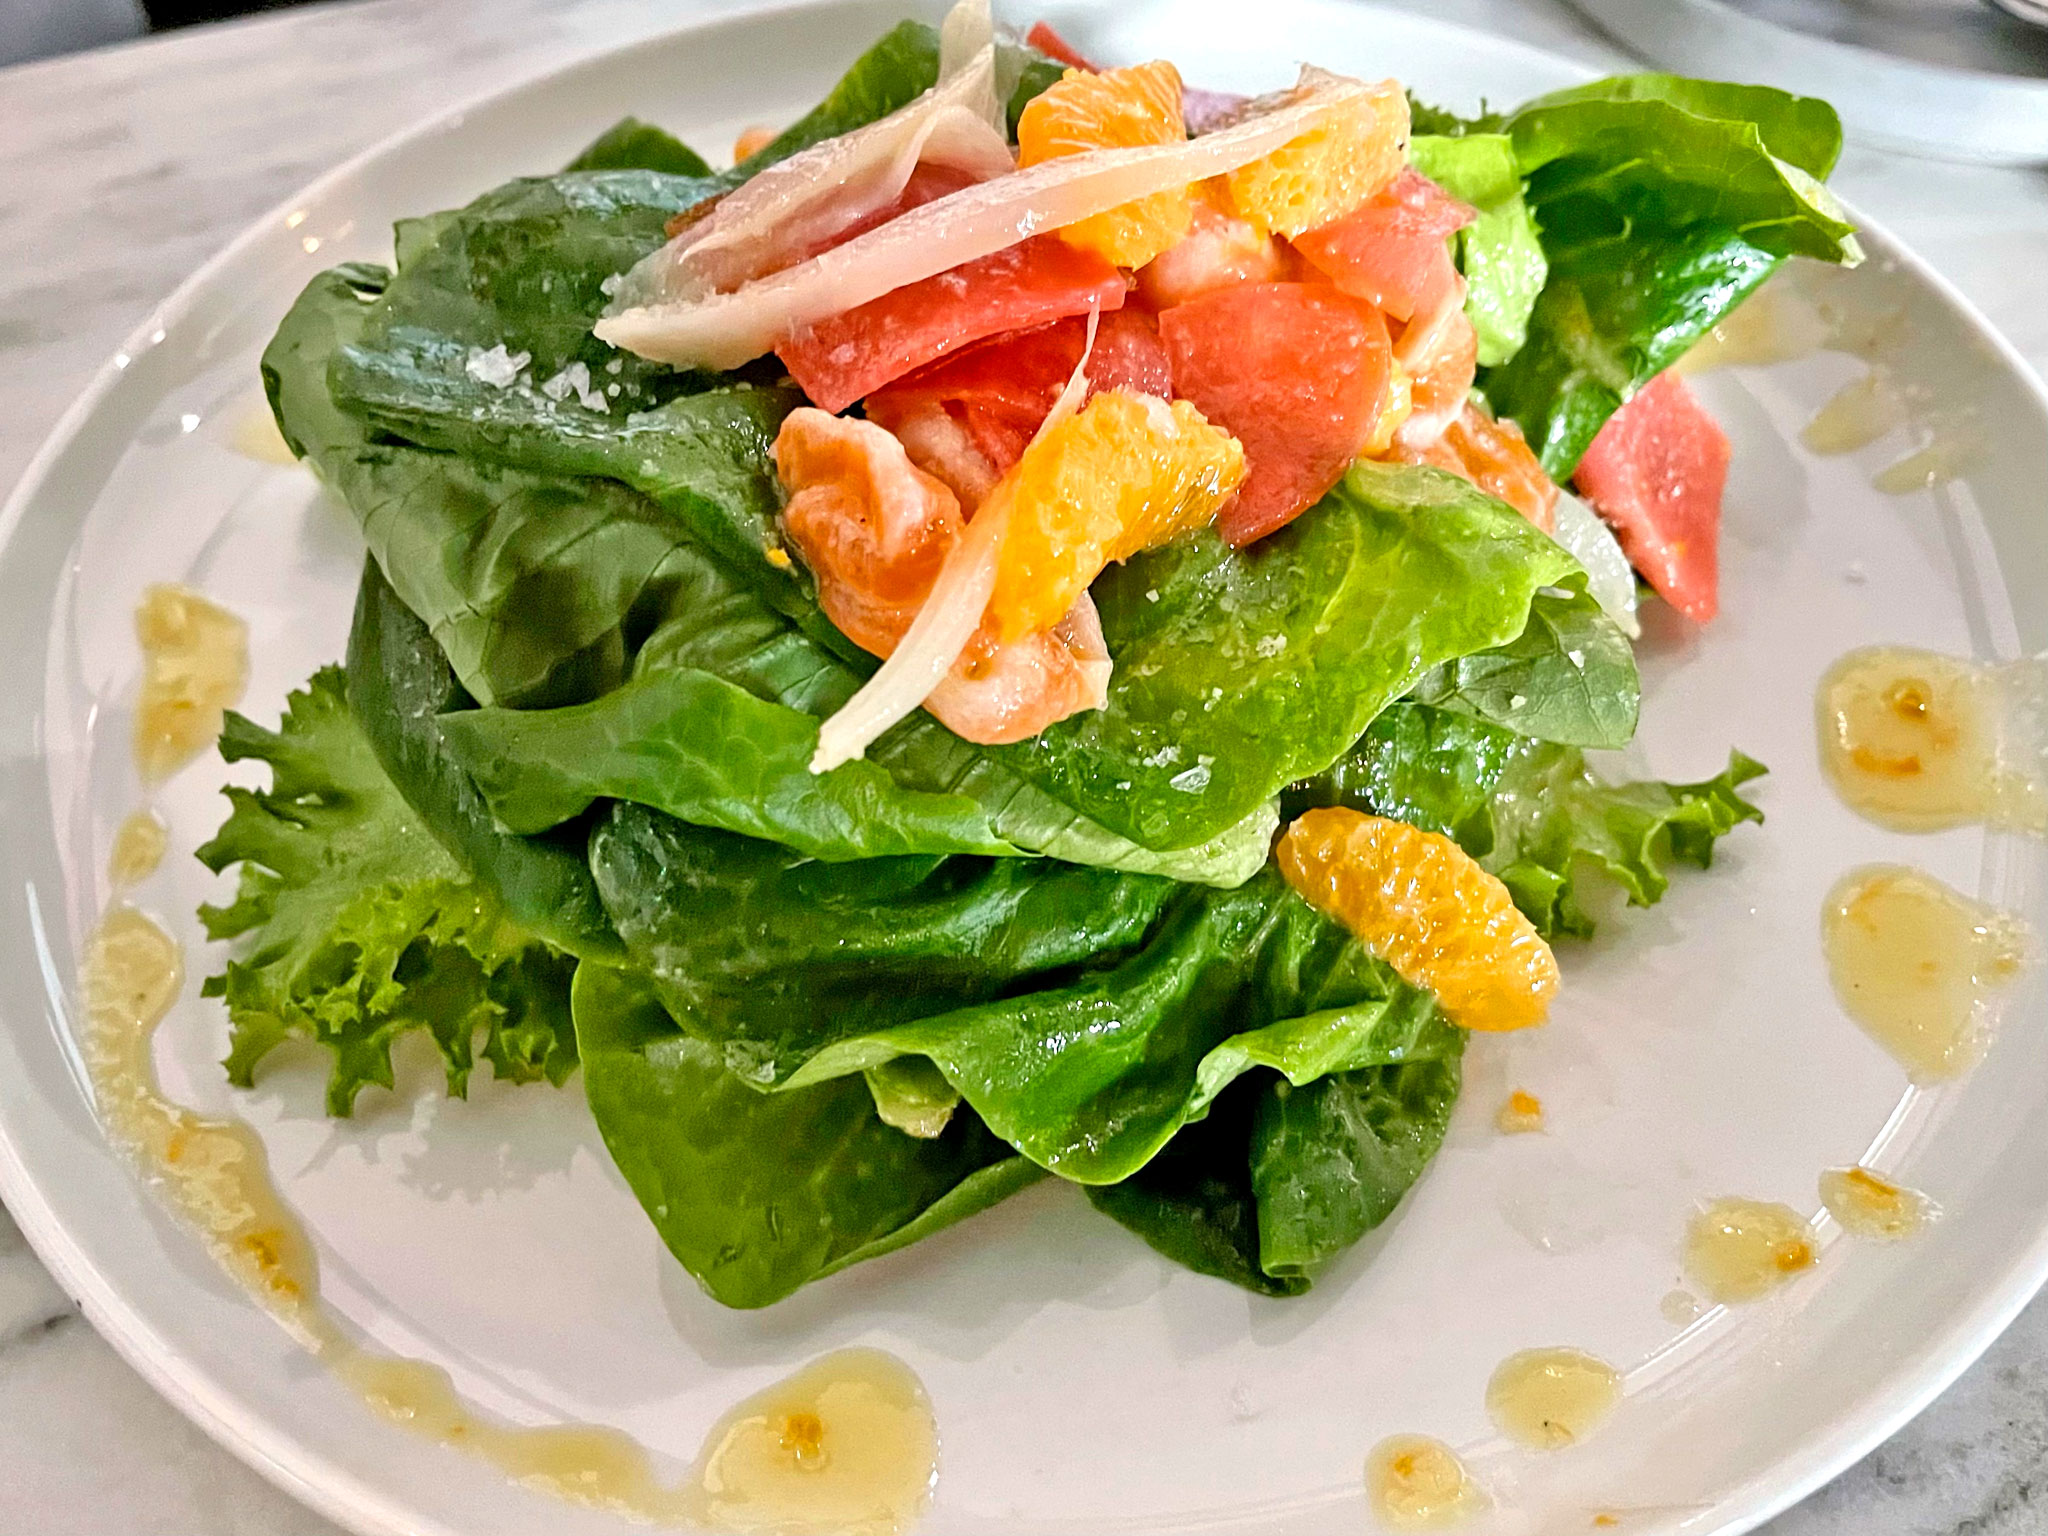 Soy Sauce Cured Salmon with Brick Street Farms Lettuce, Pickled Radish, Fennel and Mandarin Vinaigrette